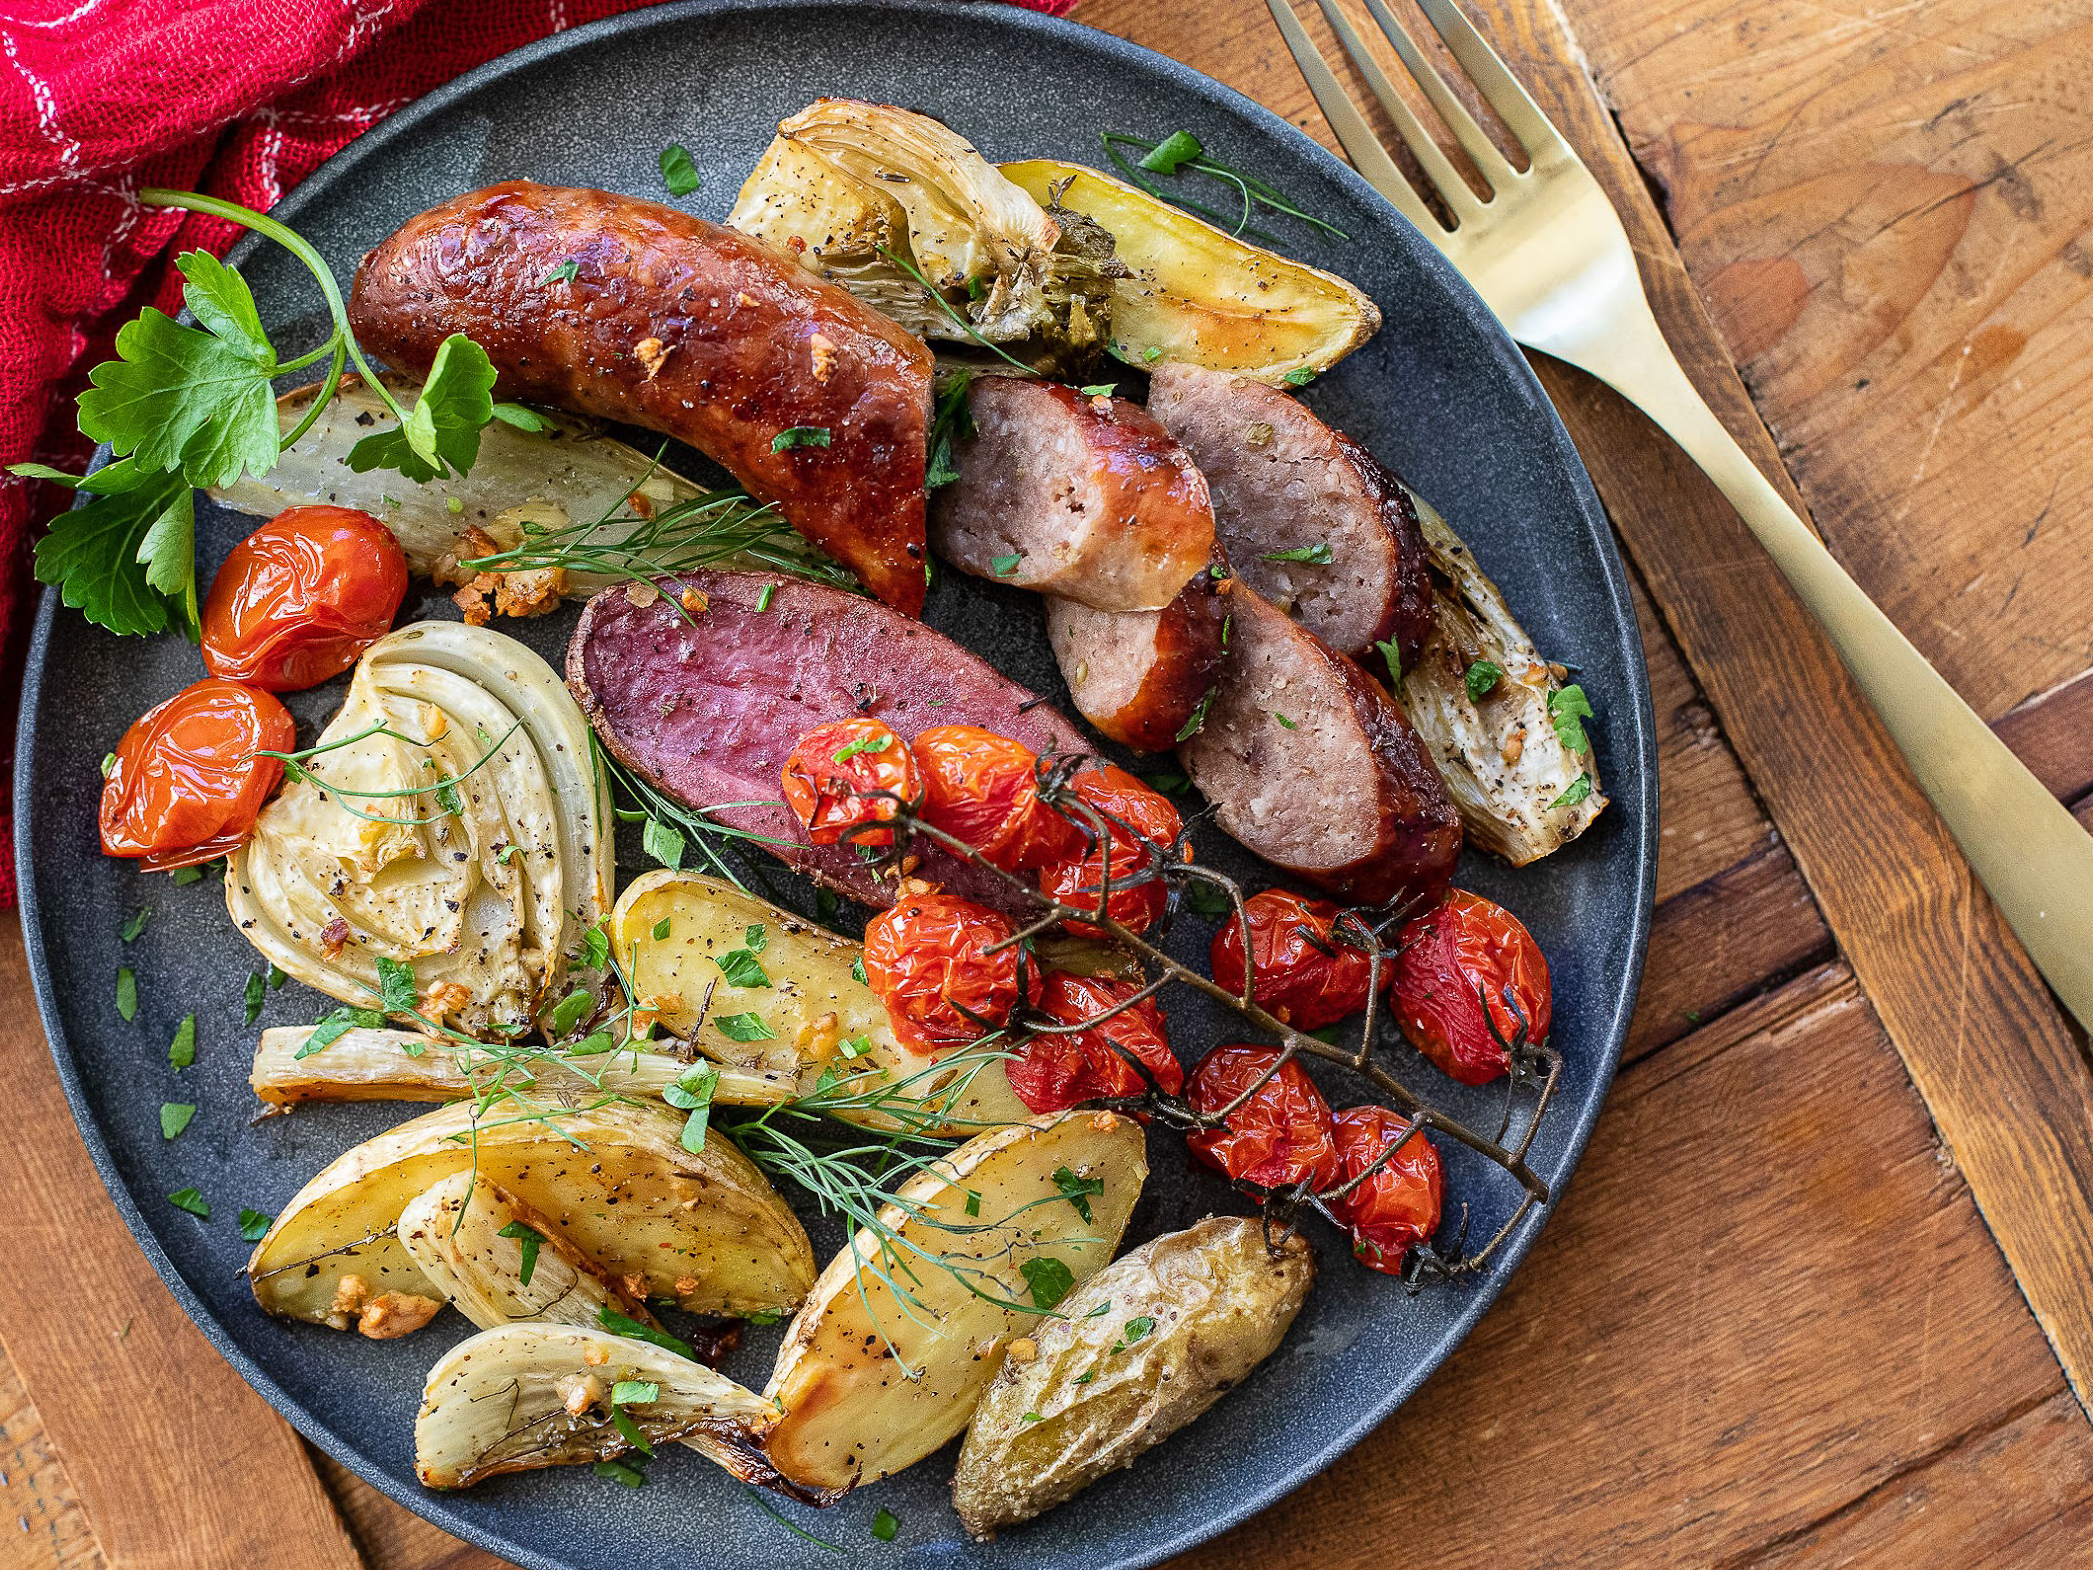 Carando Italian Sausage Is Now Available At Publix - Try It With My Roasted Italian Sausage With Fennel & Potatoes on I Heart Publix